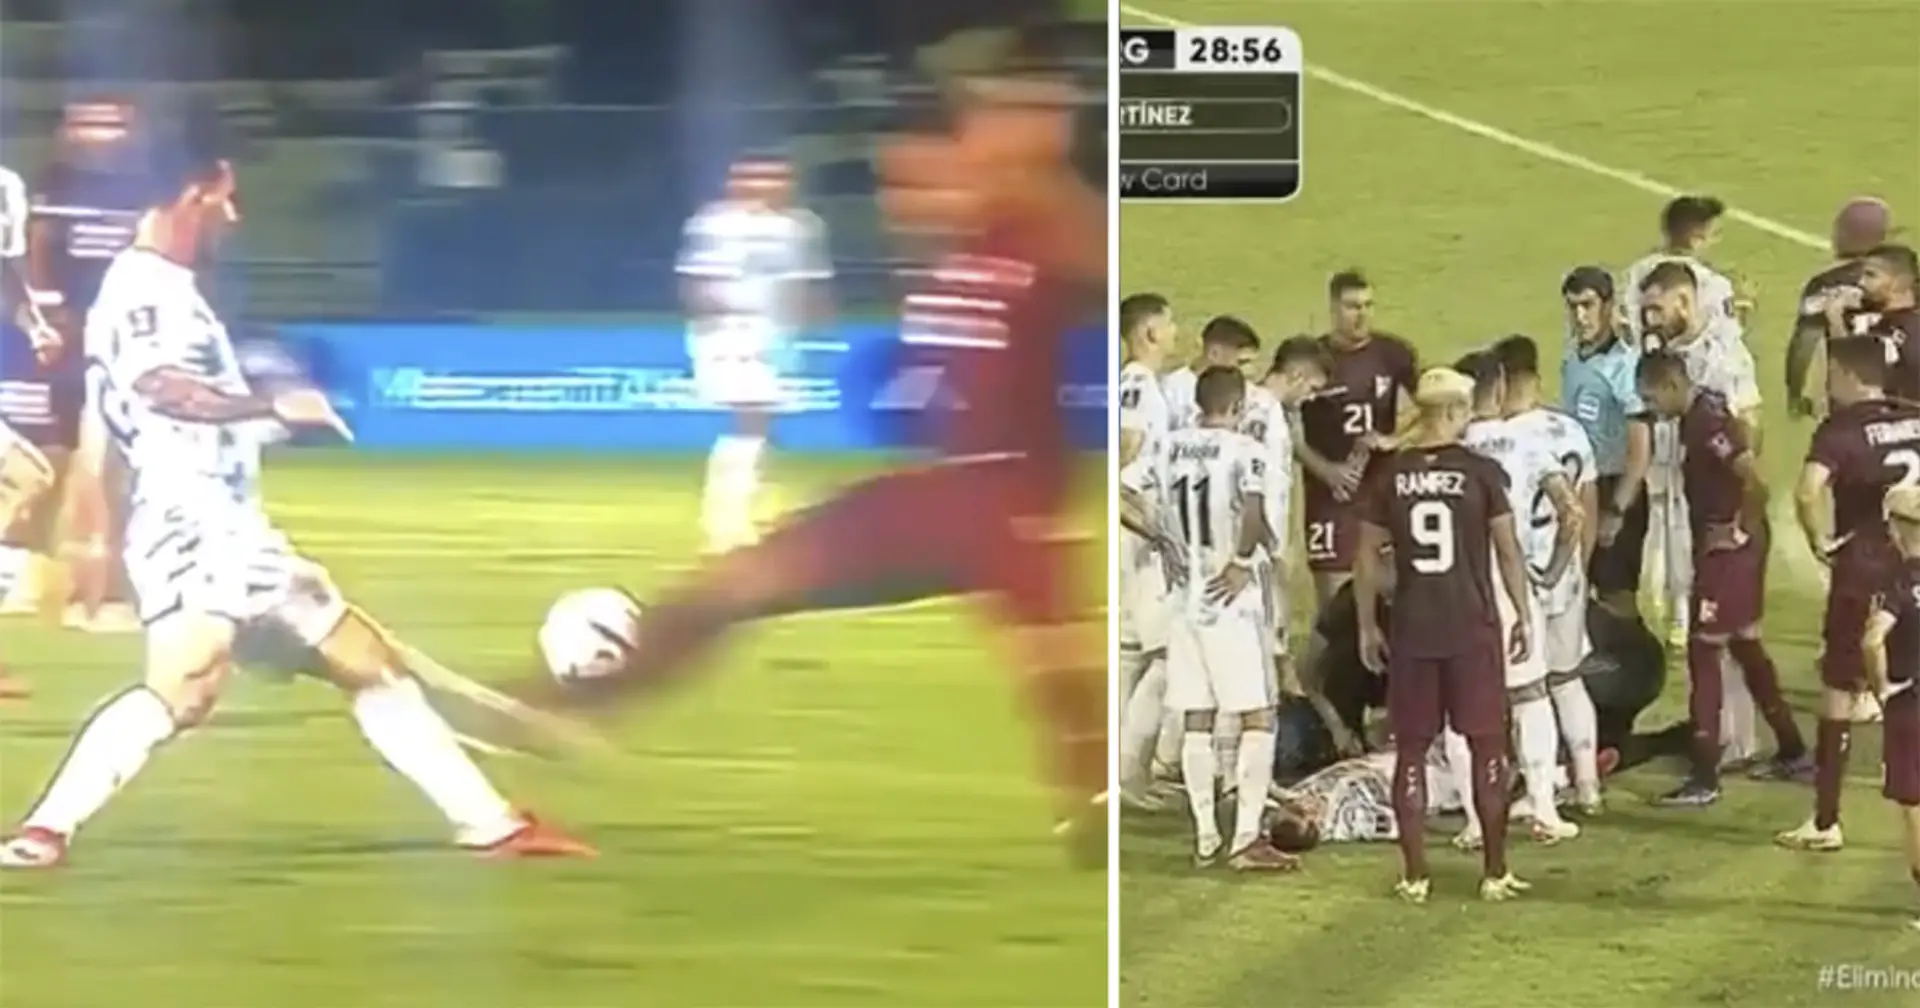 Venezuela player almost ends Messi's career with horror tackle